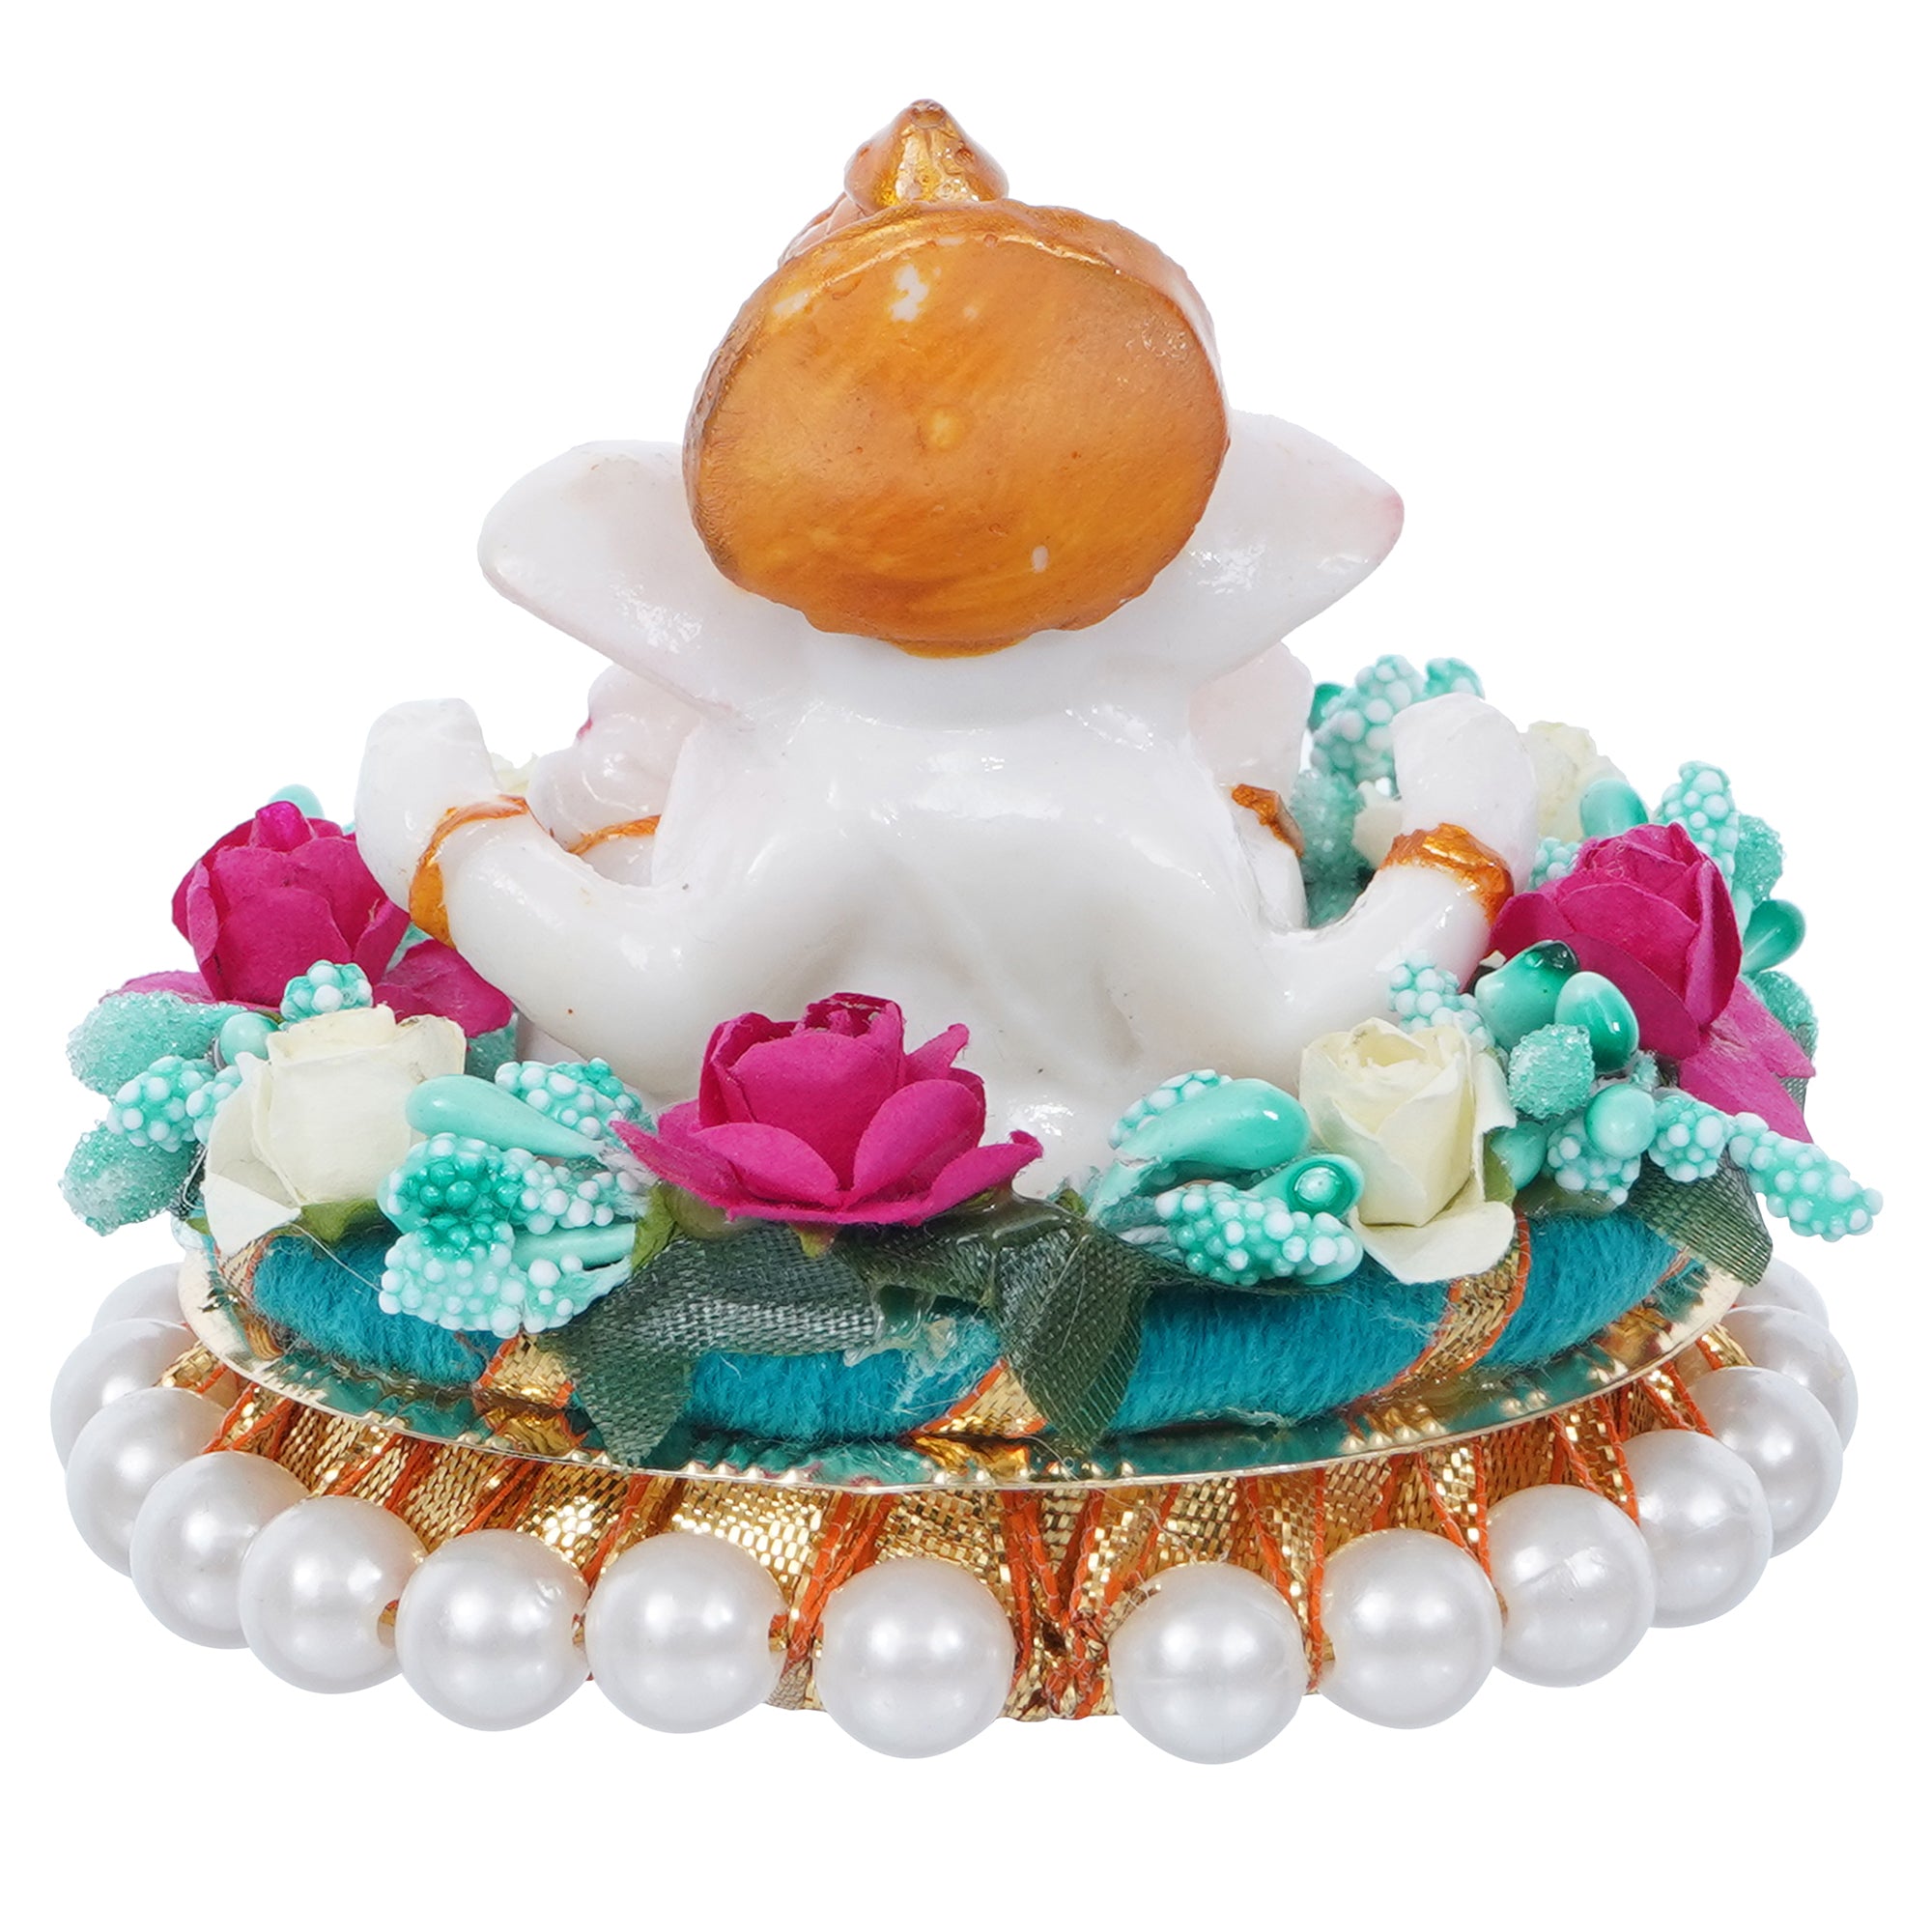 Lord Ganesha Idol on Decorative Handcrafted Plate with Colorful Flowers 6